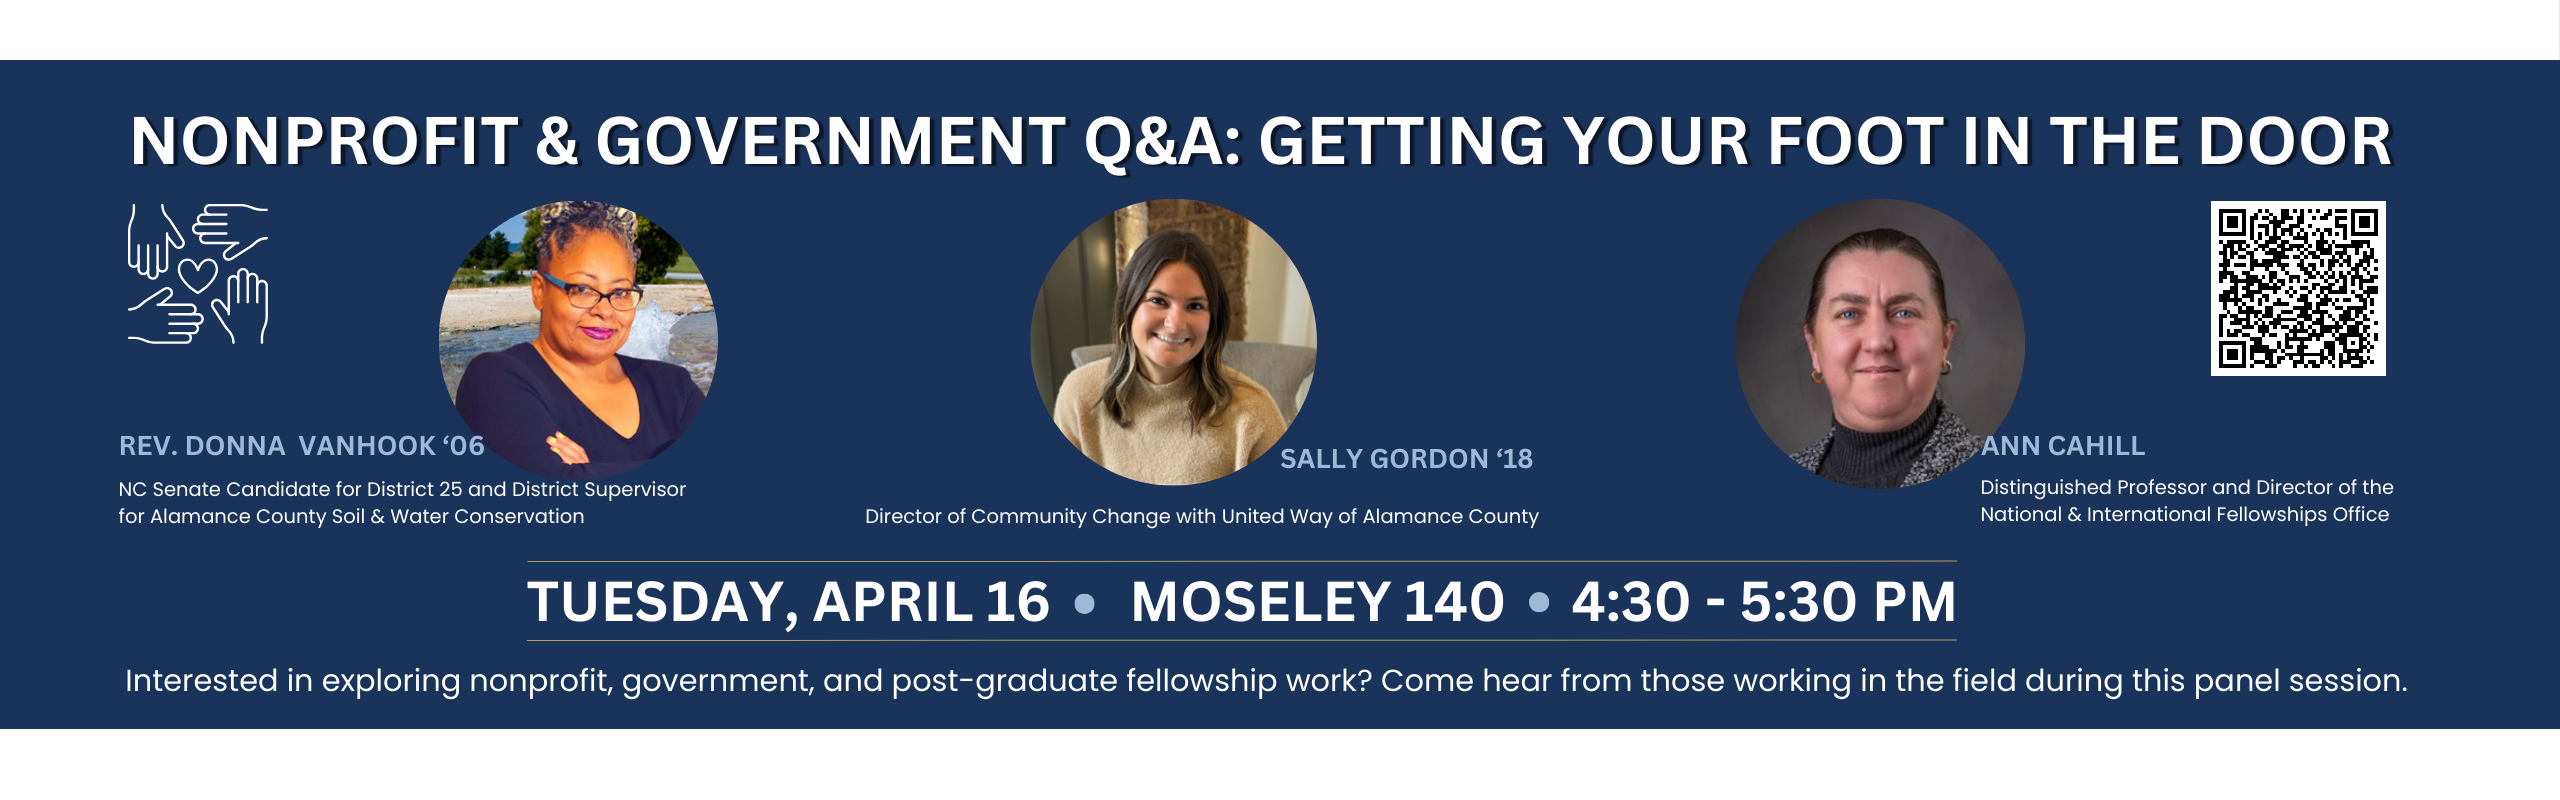 Nonprofit & Government Q&A on April 16. See EJN for more details